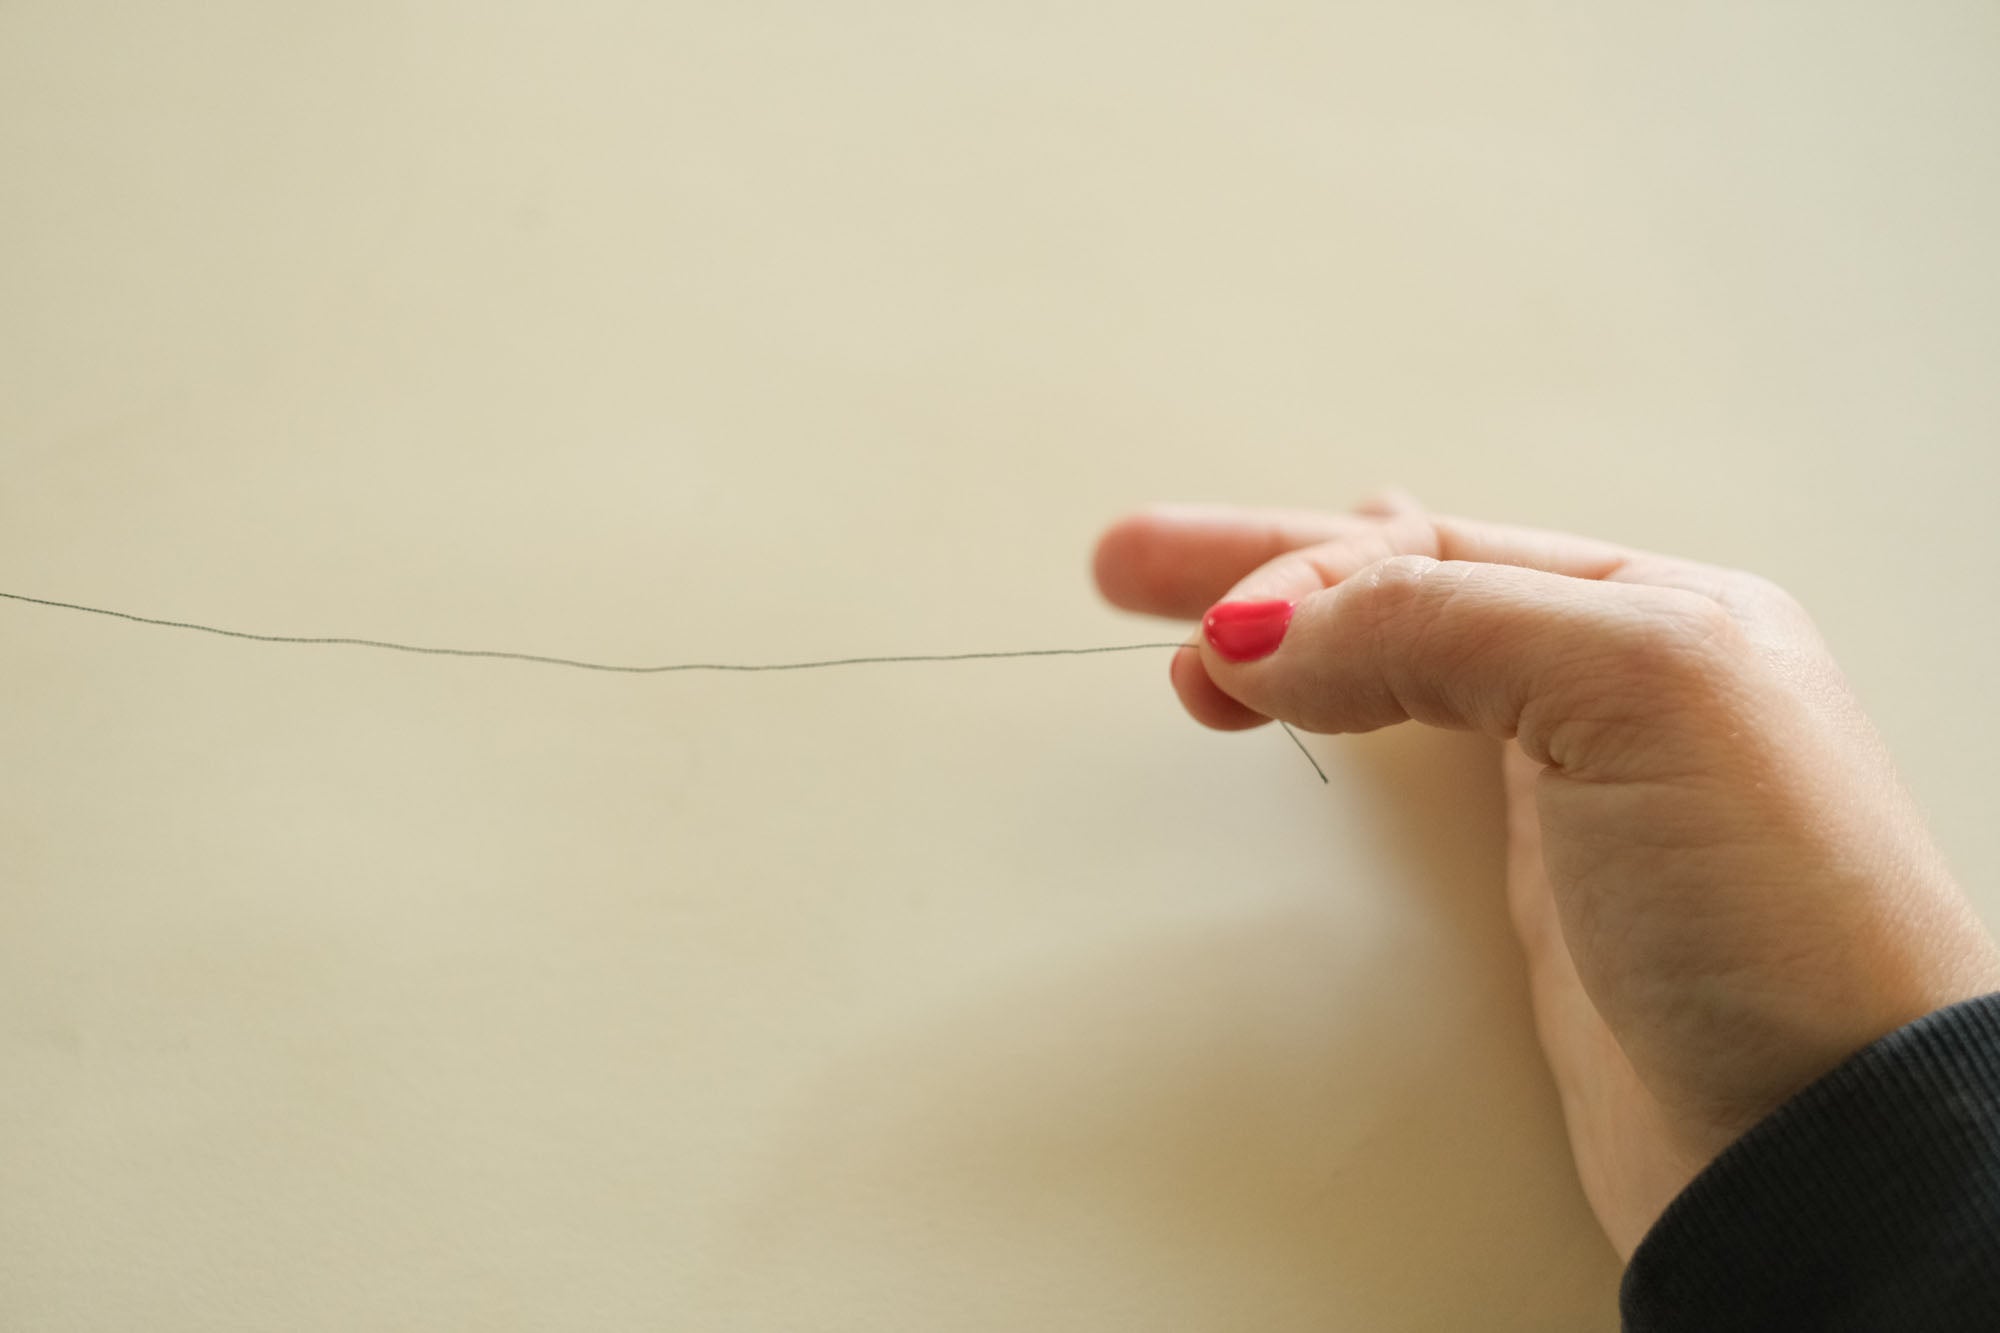 how to knot thread for hand sewing